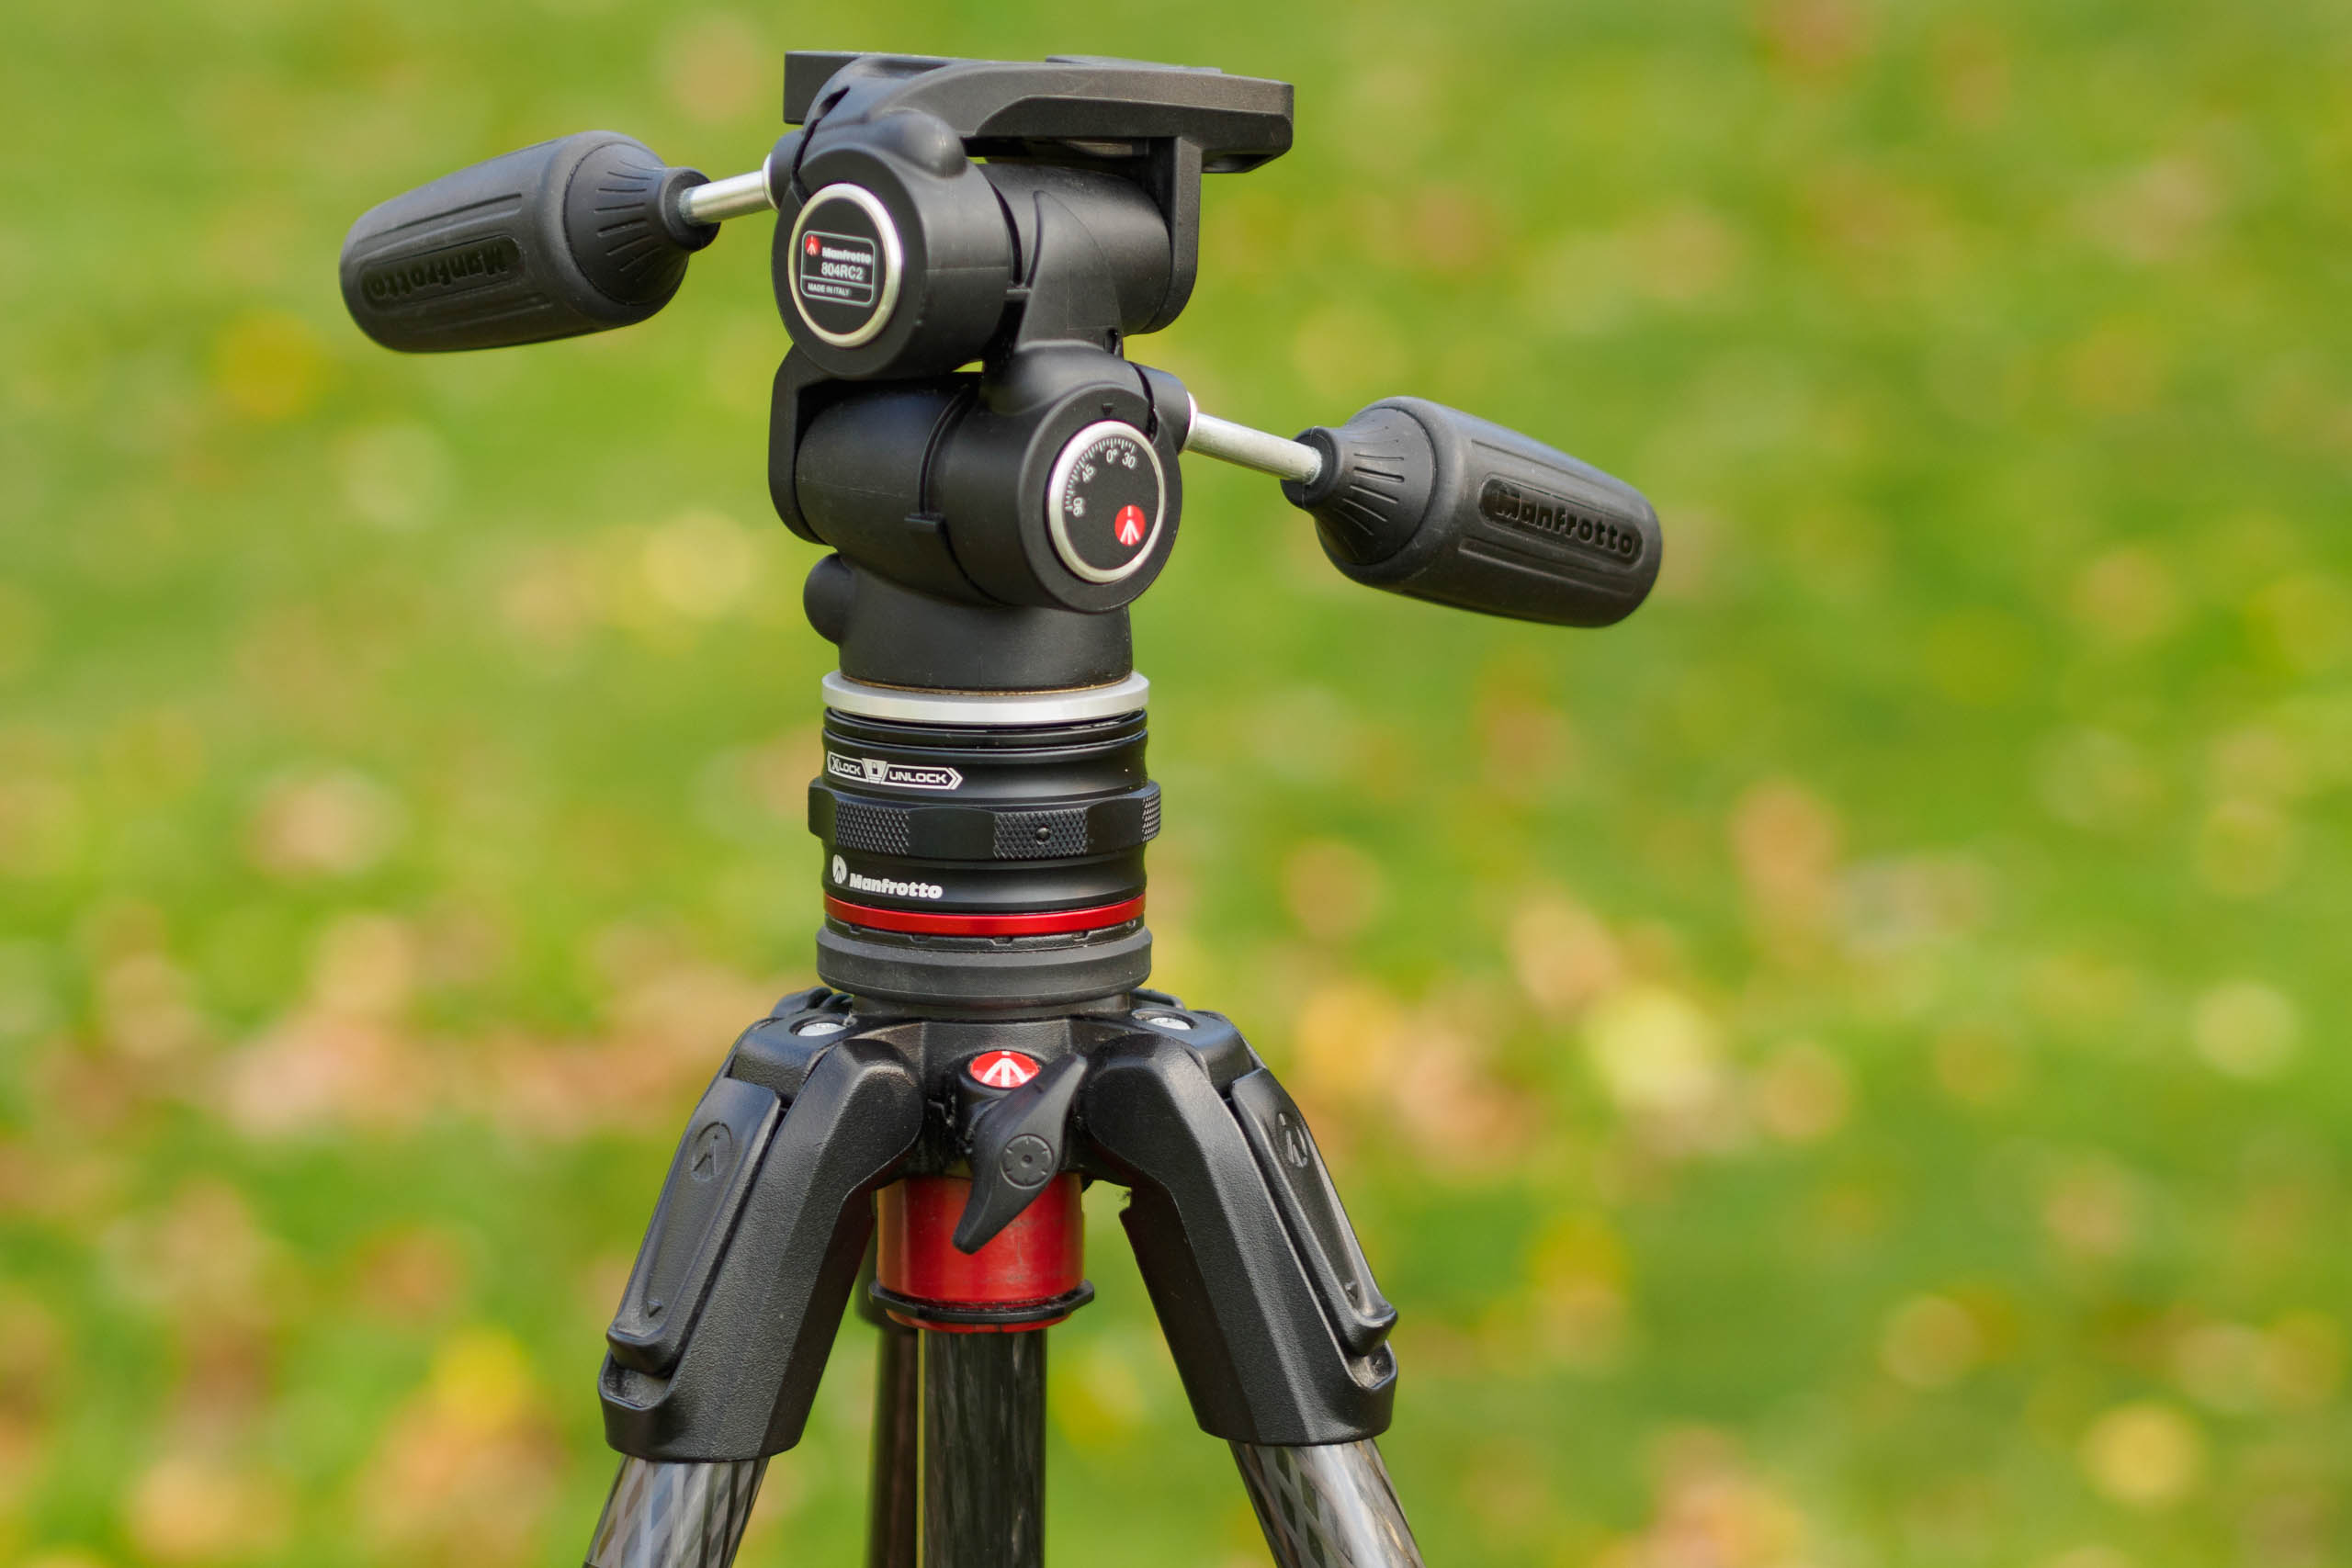 Manfrotto Move Quick Release catcher in use